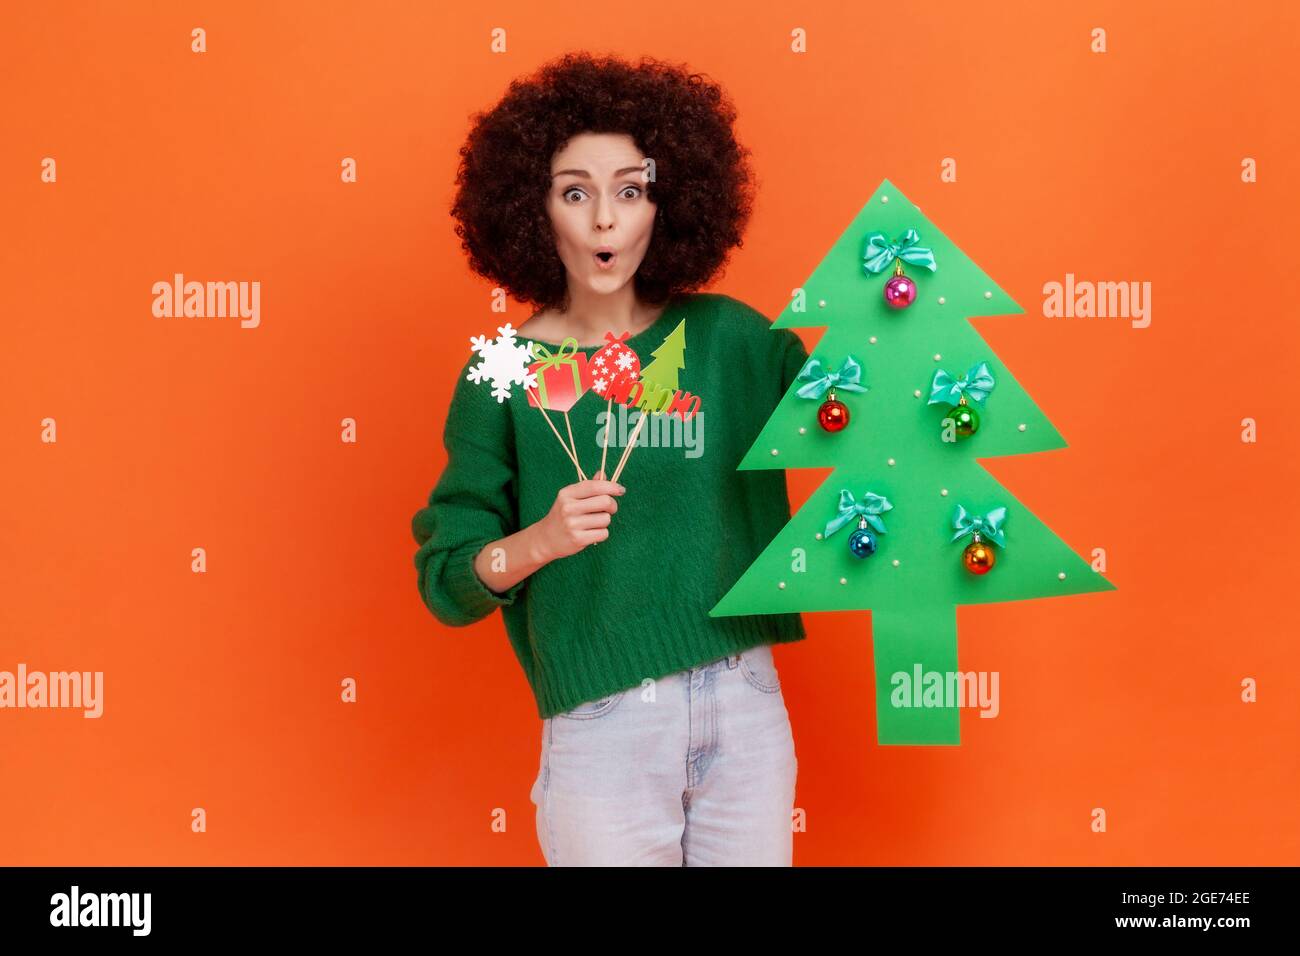 Amazed woman with curly hair wearing green casual style sweater holding mask on sticks and Christmas tree, having shocked expression. Indoor studio sh Stock Photo